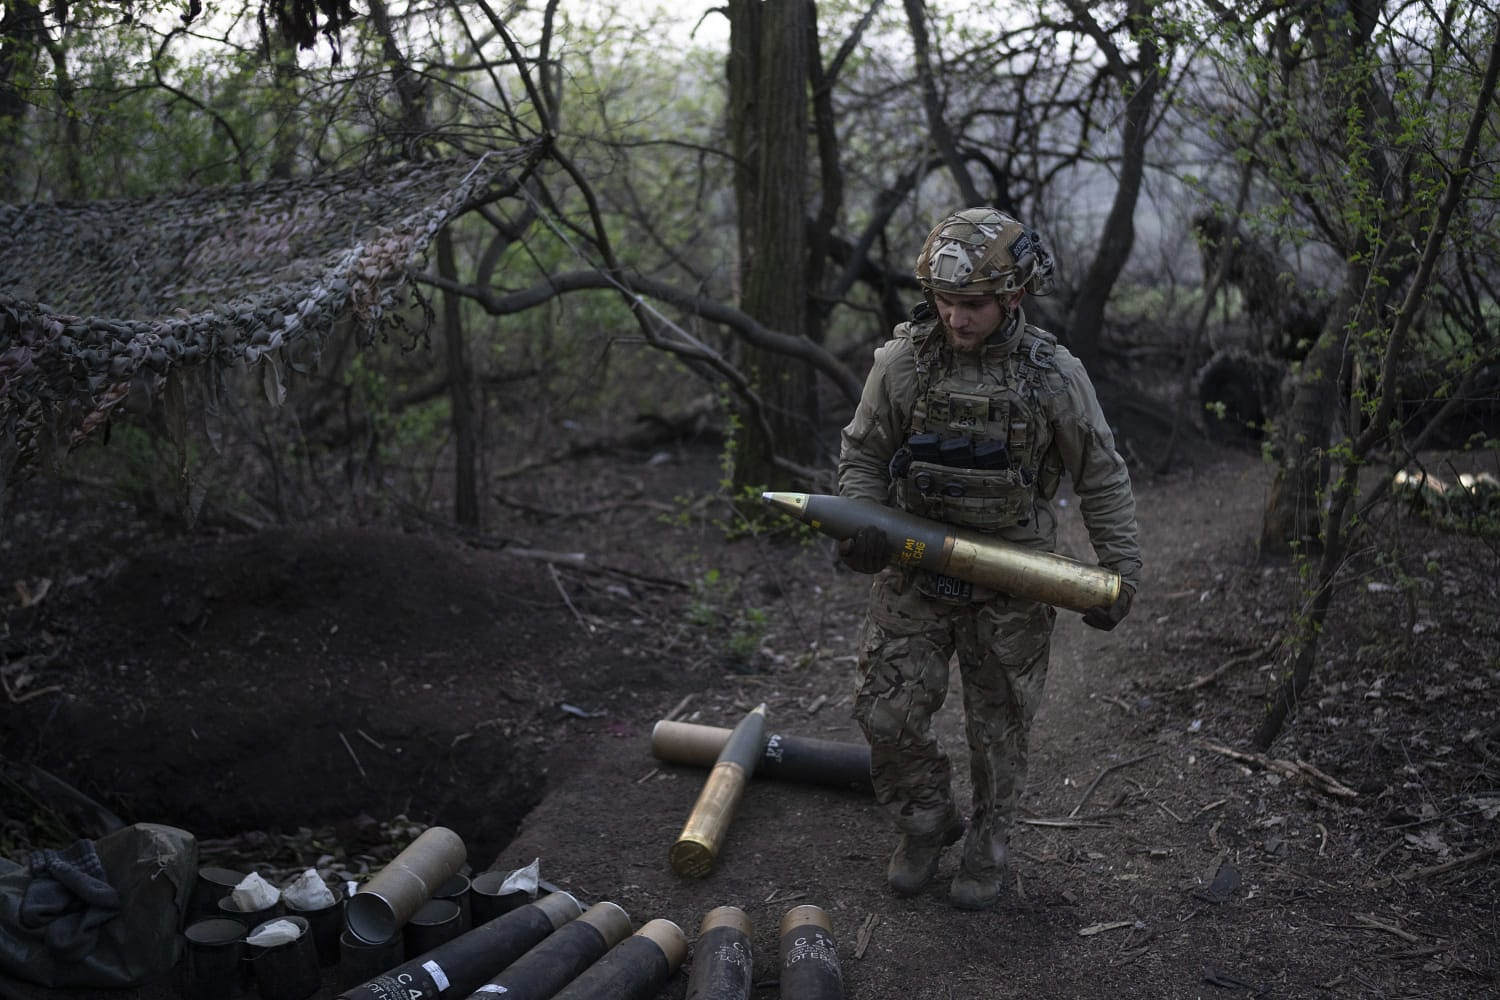 With U.S. aid still stalled and its army at a breaking point, Ukraine warns: We will lose